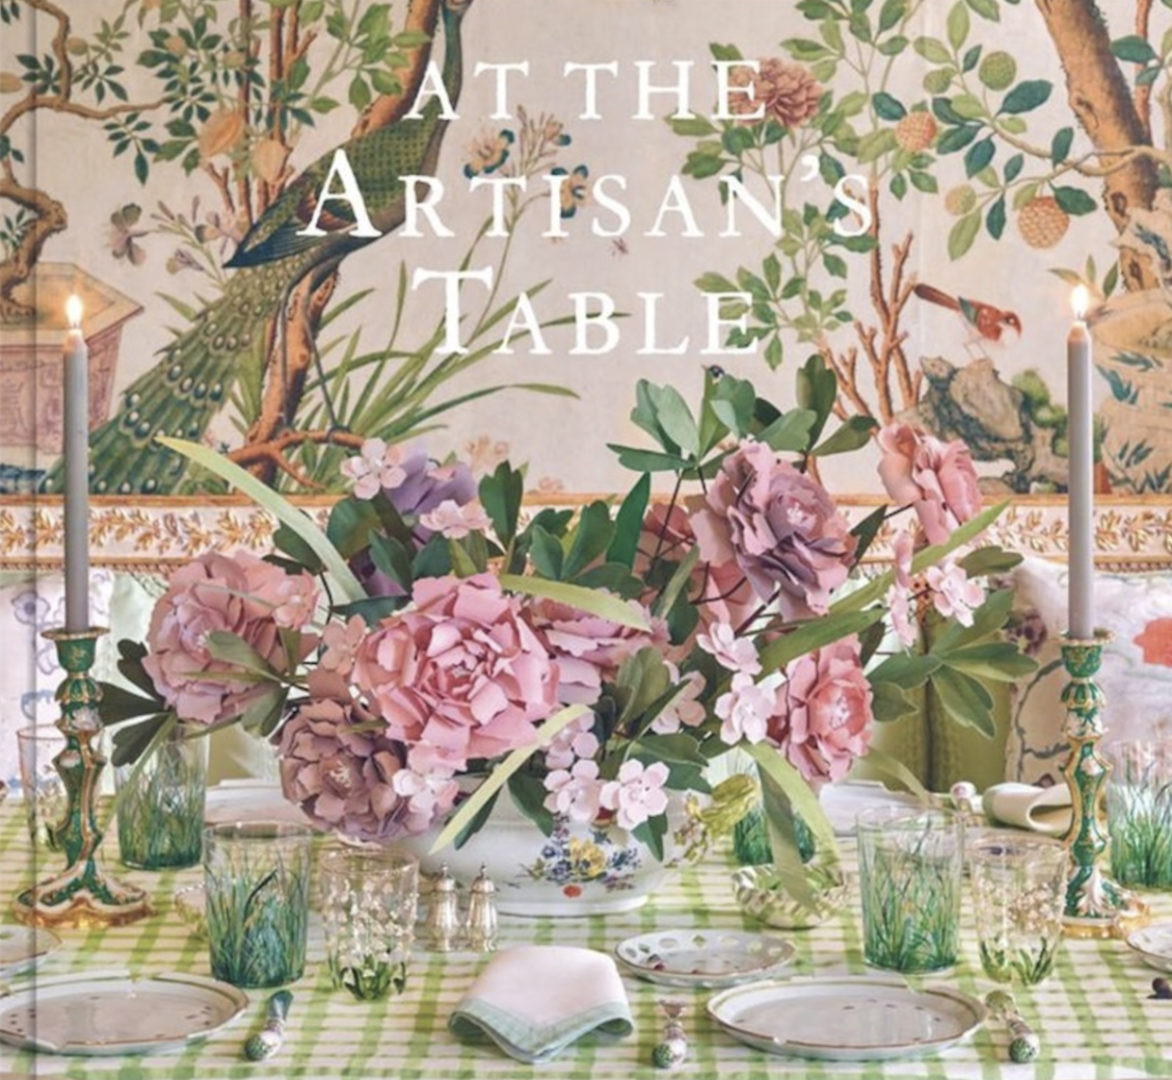 “At The Artisan’s Table”